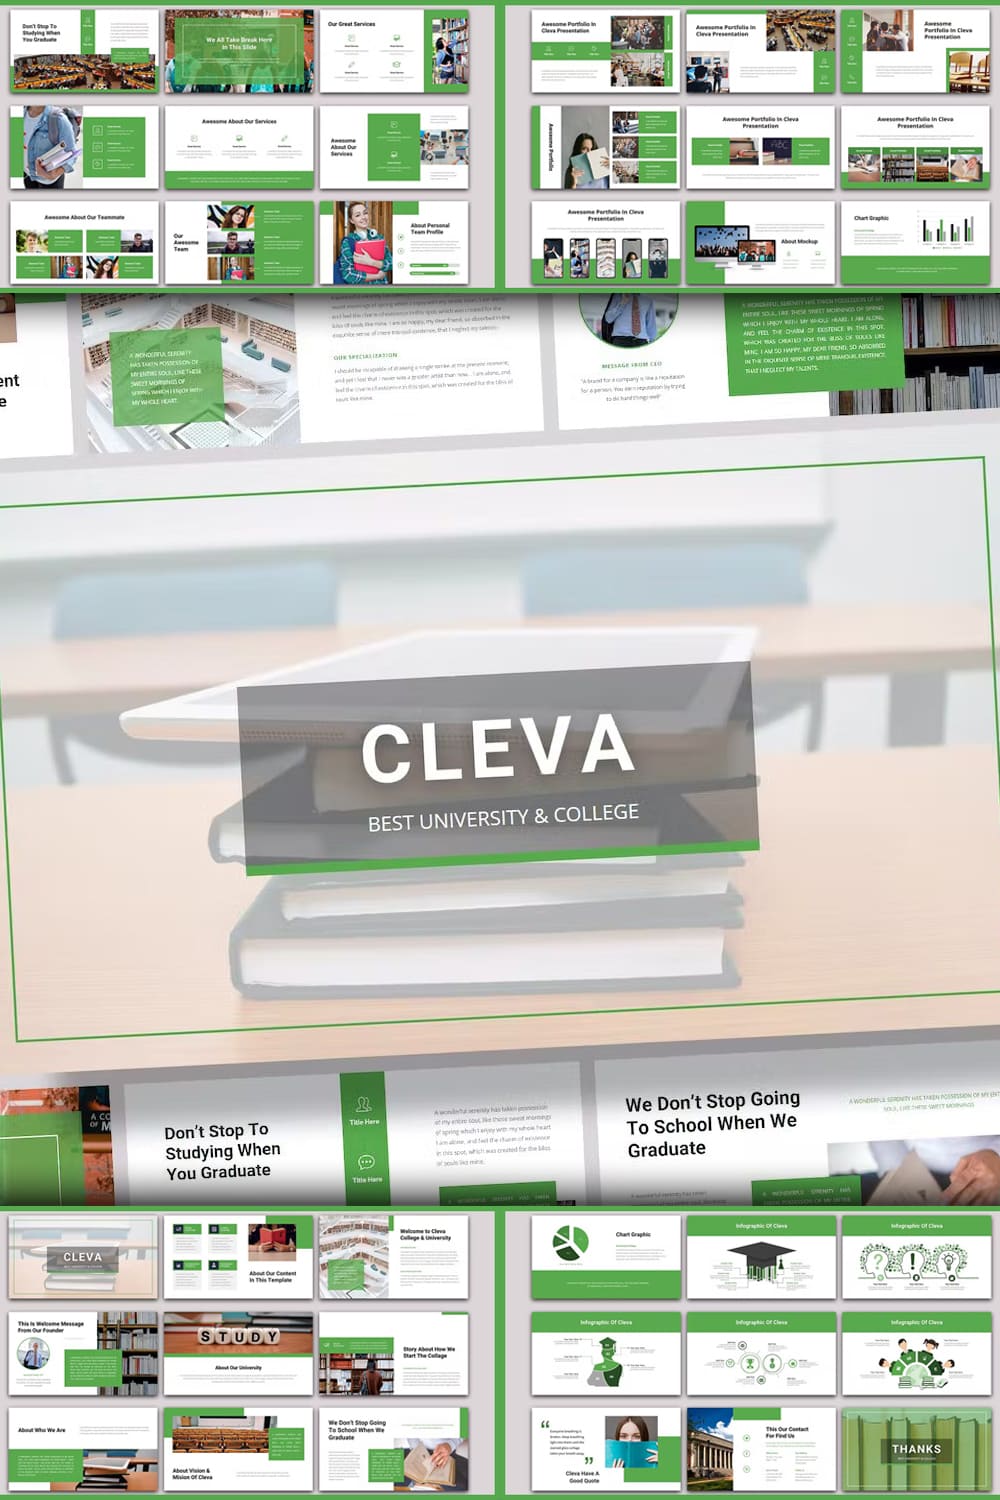 Cleva university collage powerpoint template.